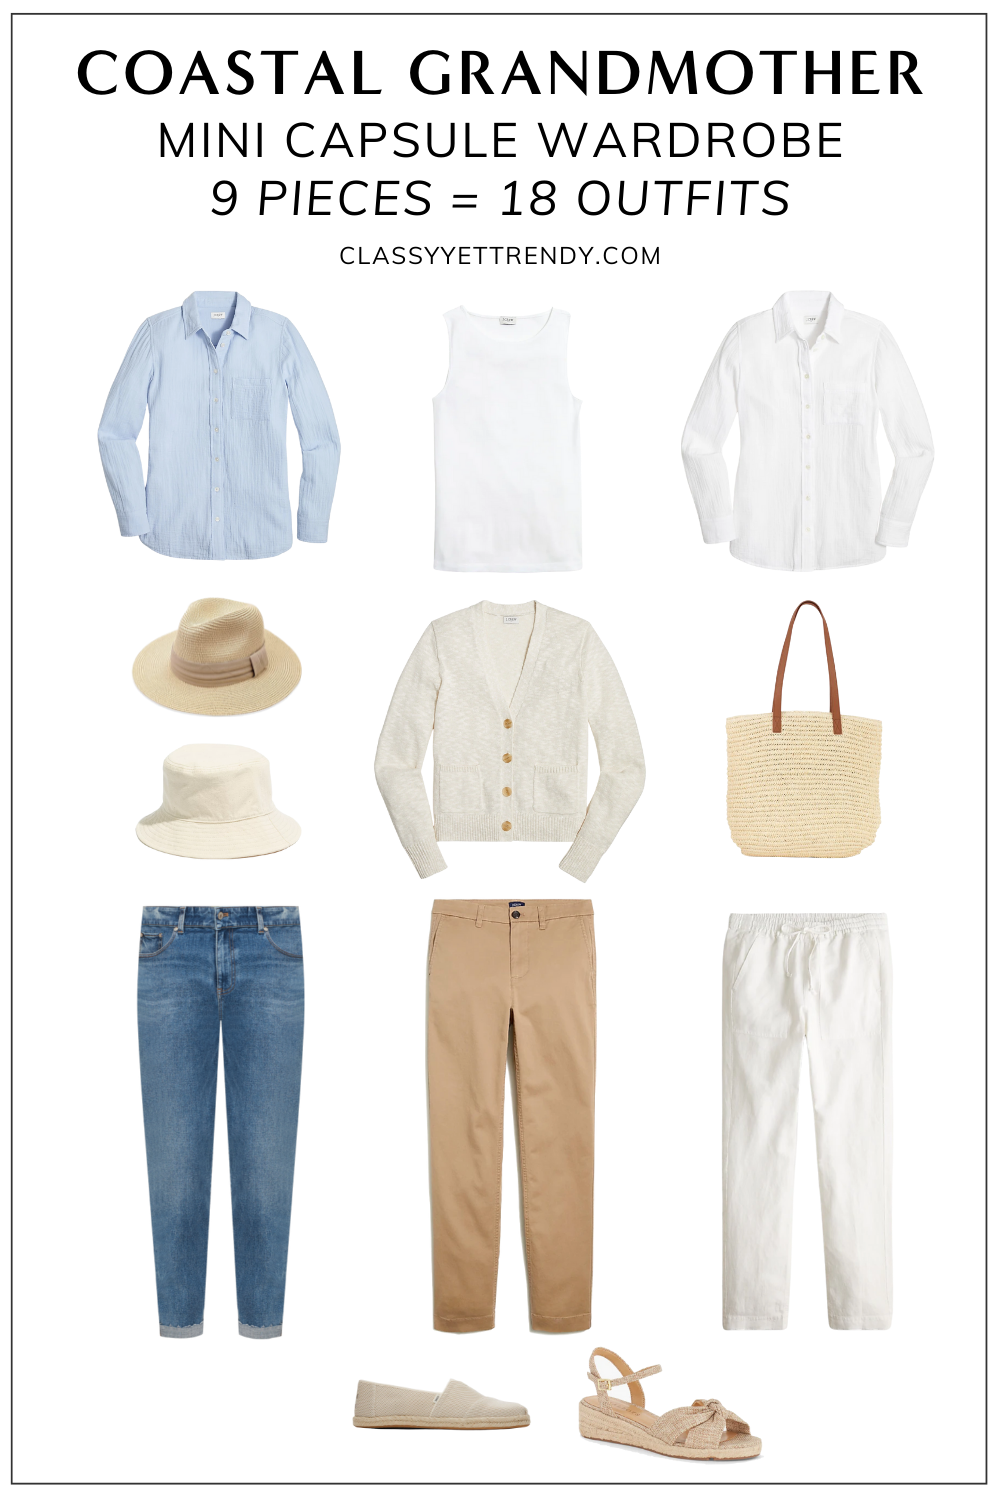 5-Day Travel Capsule Wardrobe: What I Packed & Wore On Our Gulf Coast  Vacation - Classy Yet Trendy